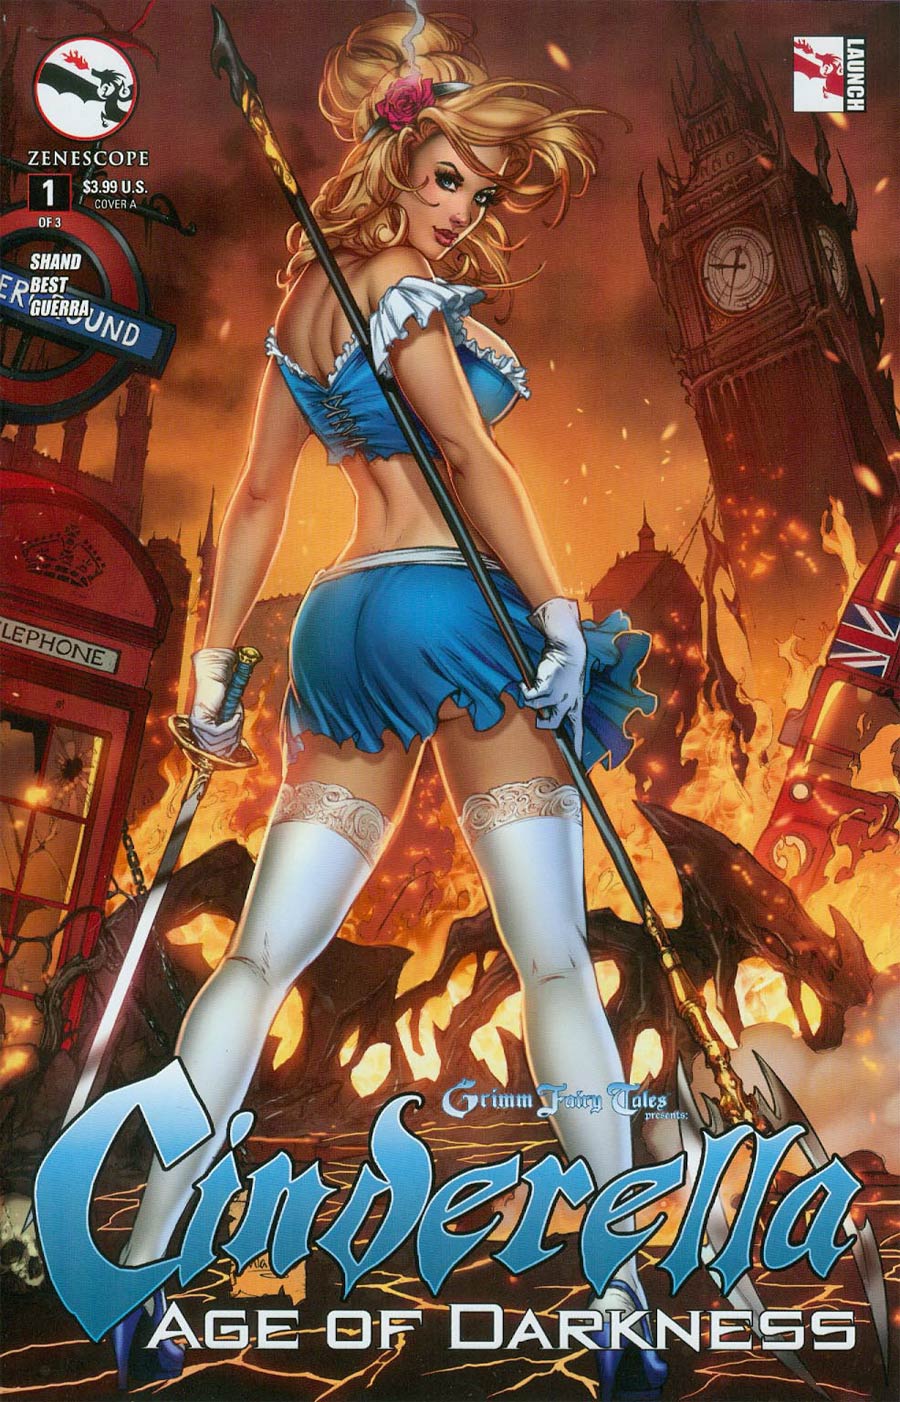 Grimm Fairy Tales Presents Cinderella #1 Cover A Mike Krome (Age Of Darkness Tie-In)